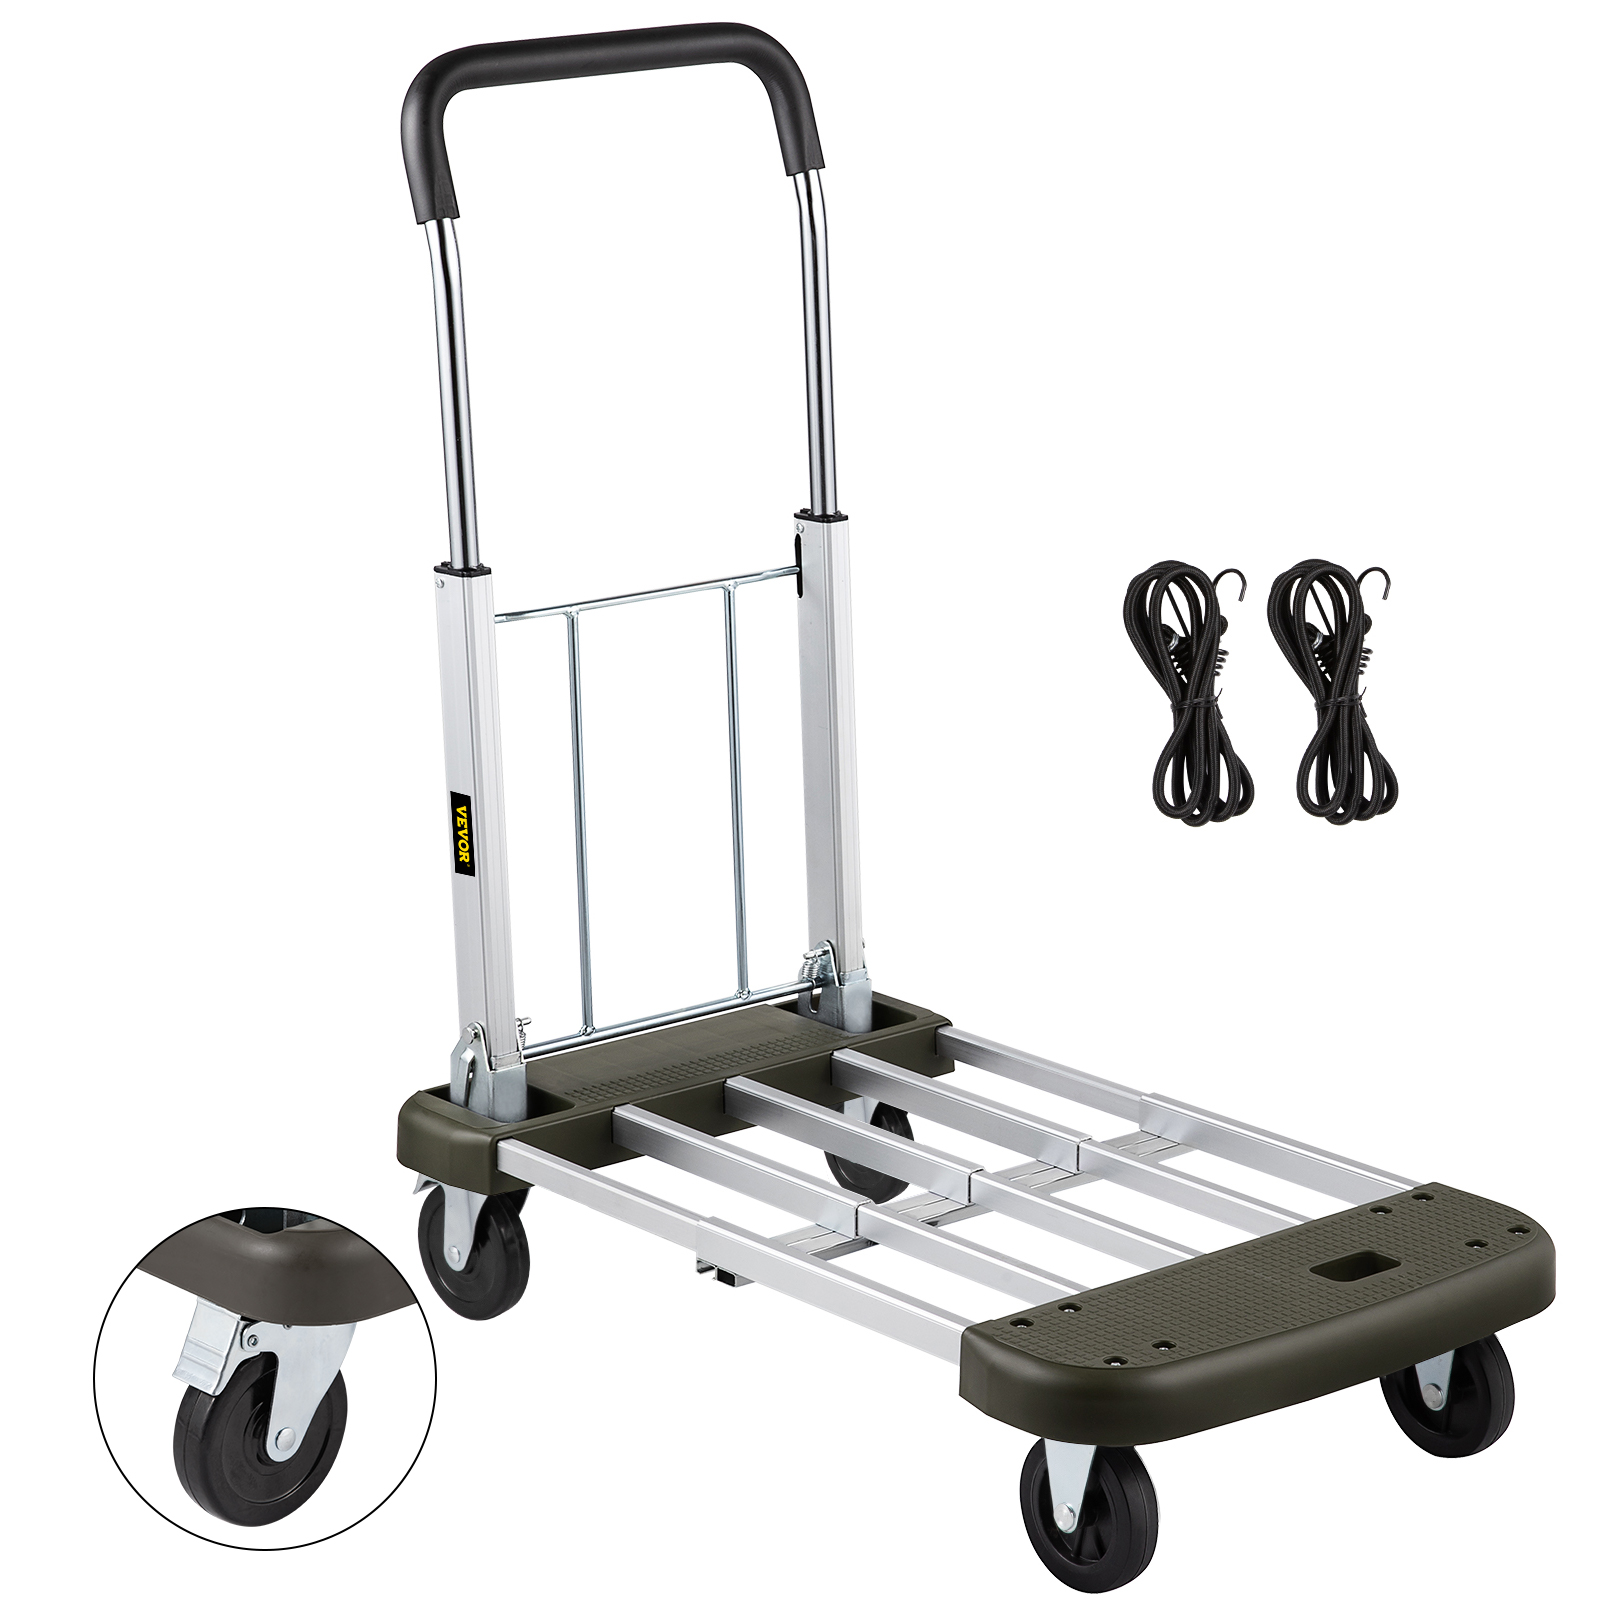 2 Spinner Wheels Design Luggage Cart Hand Truck Portable Foldable Hand Trolley 4-Wheels Flat Luggage Cart with Telescopic Stainless Steel Three-fold Handle 